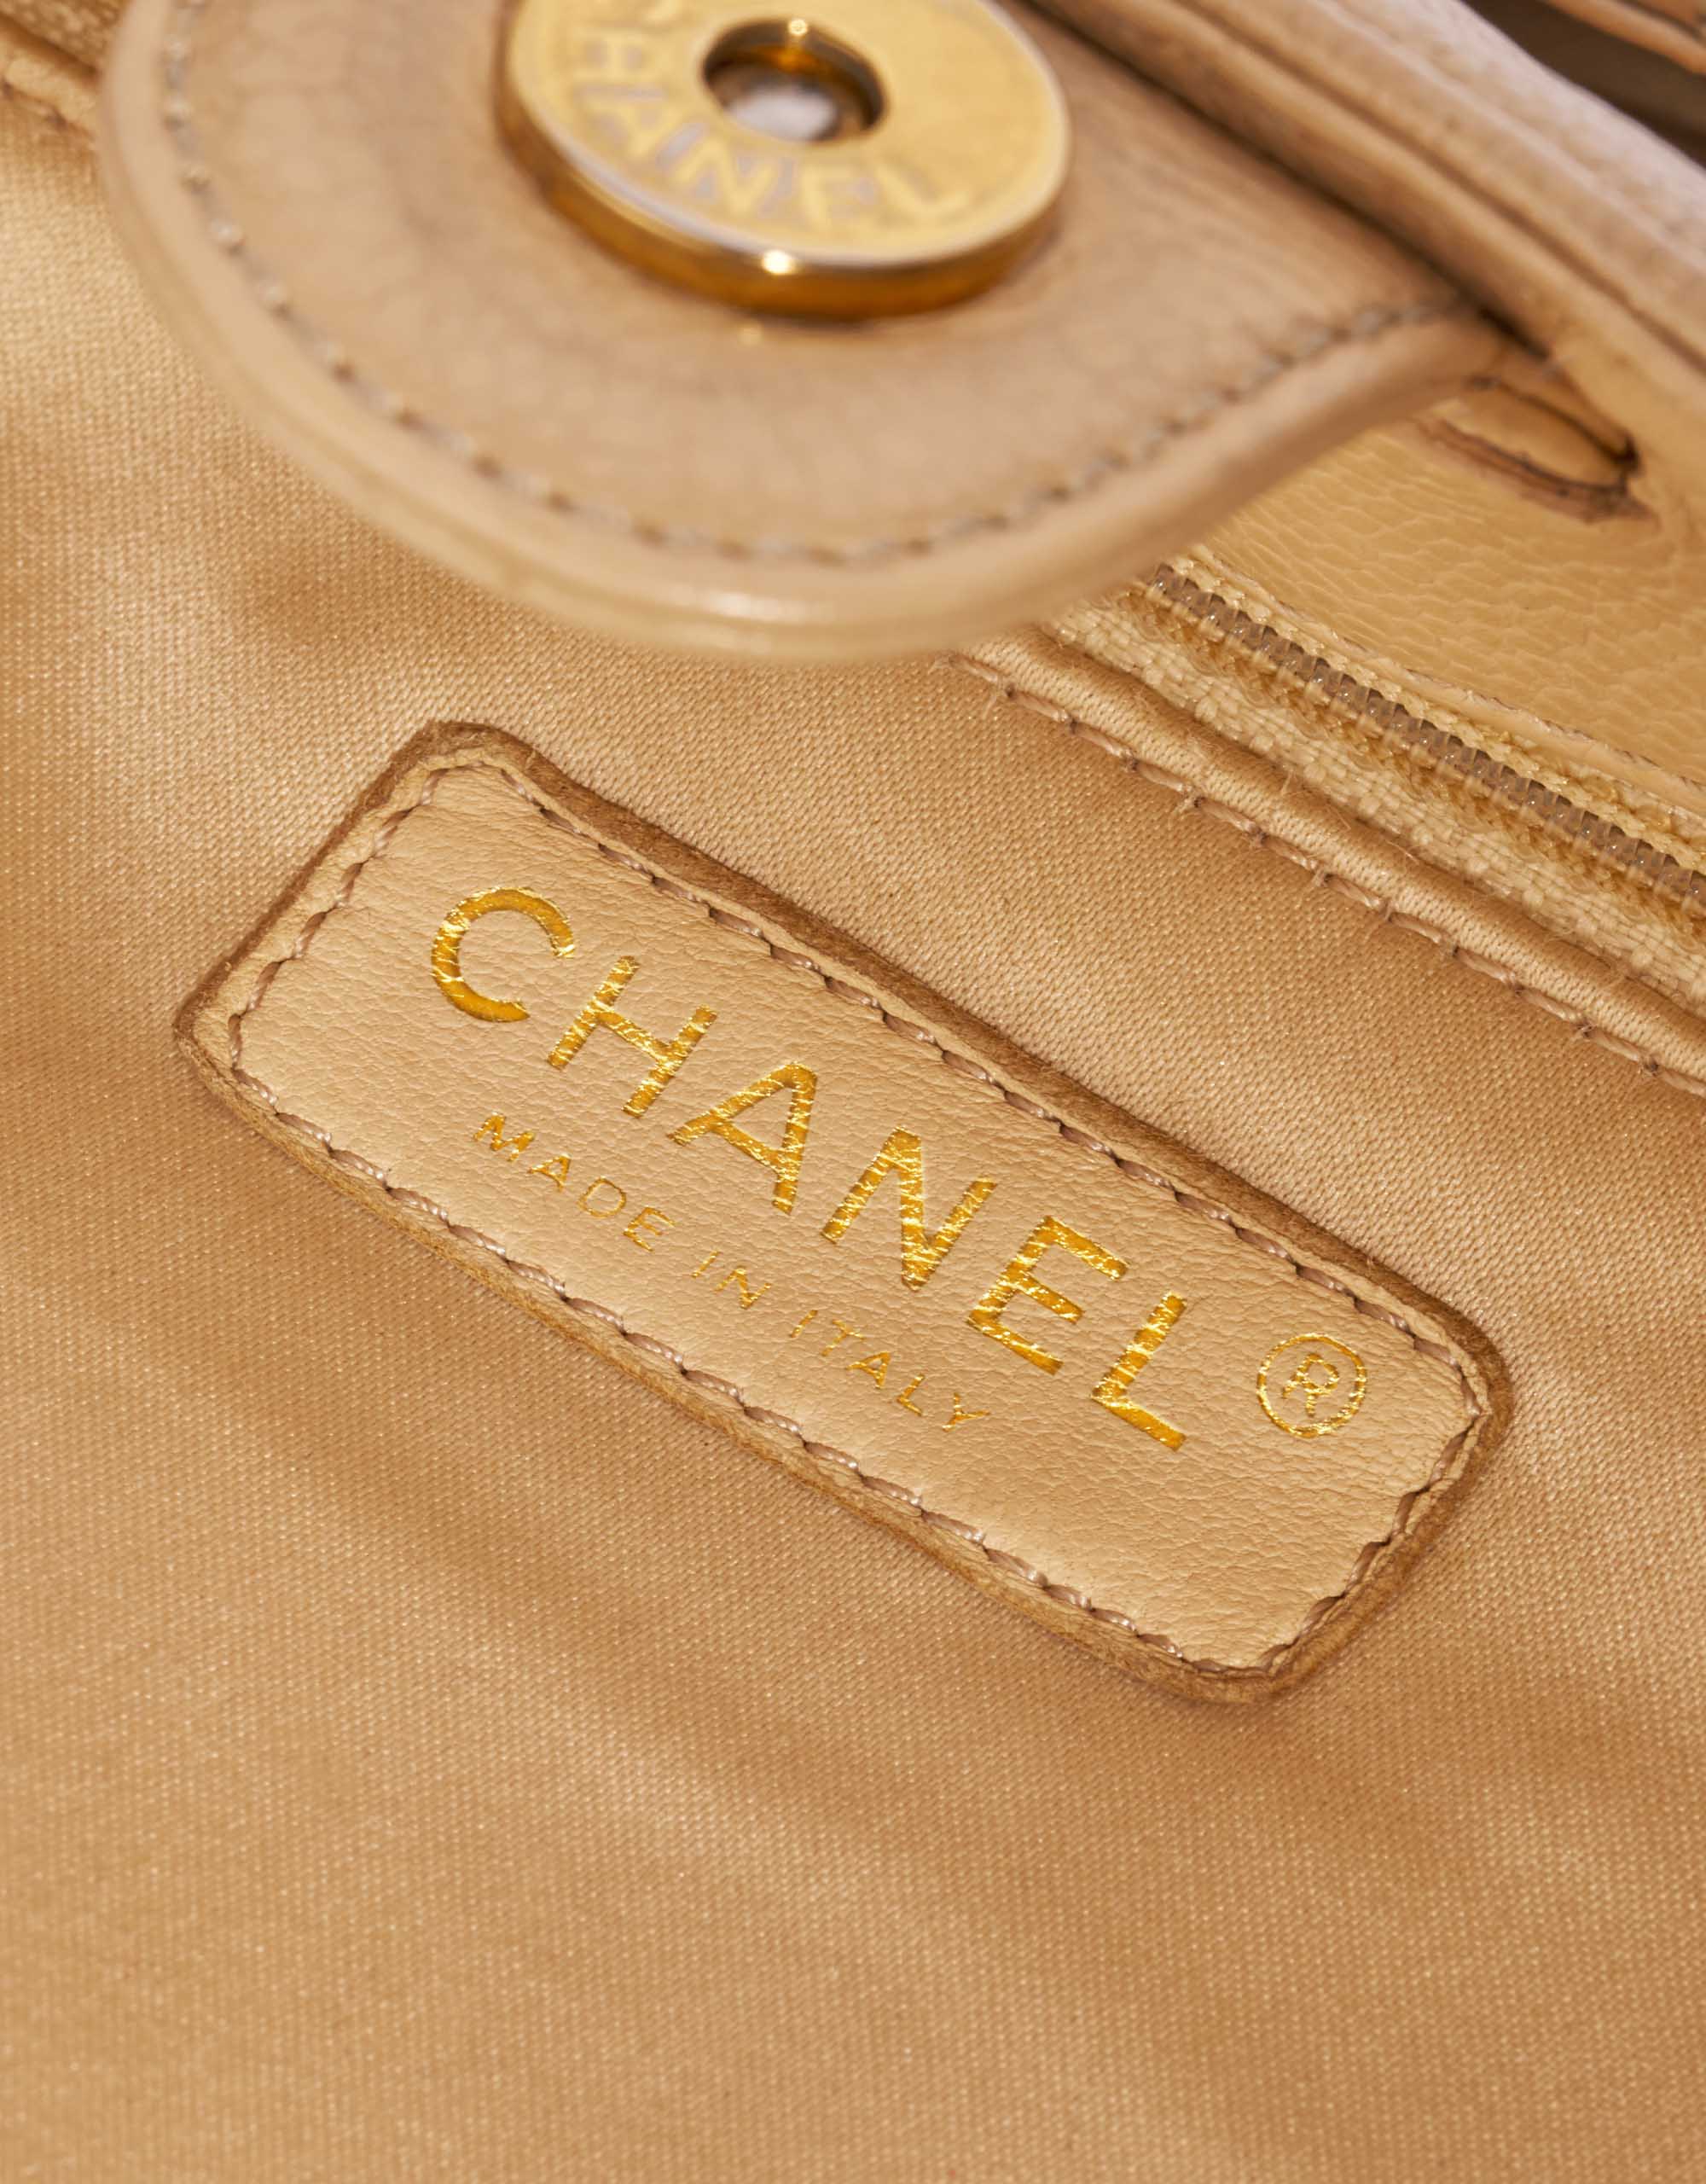 Pre-owned Chanel bag Shopping Tote PST Caviar Beige Beige Logo | Sell your designer bag on Saclab.com